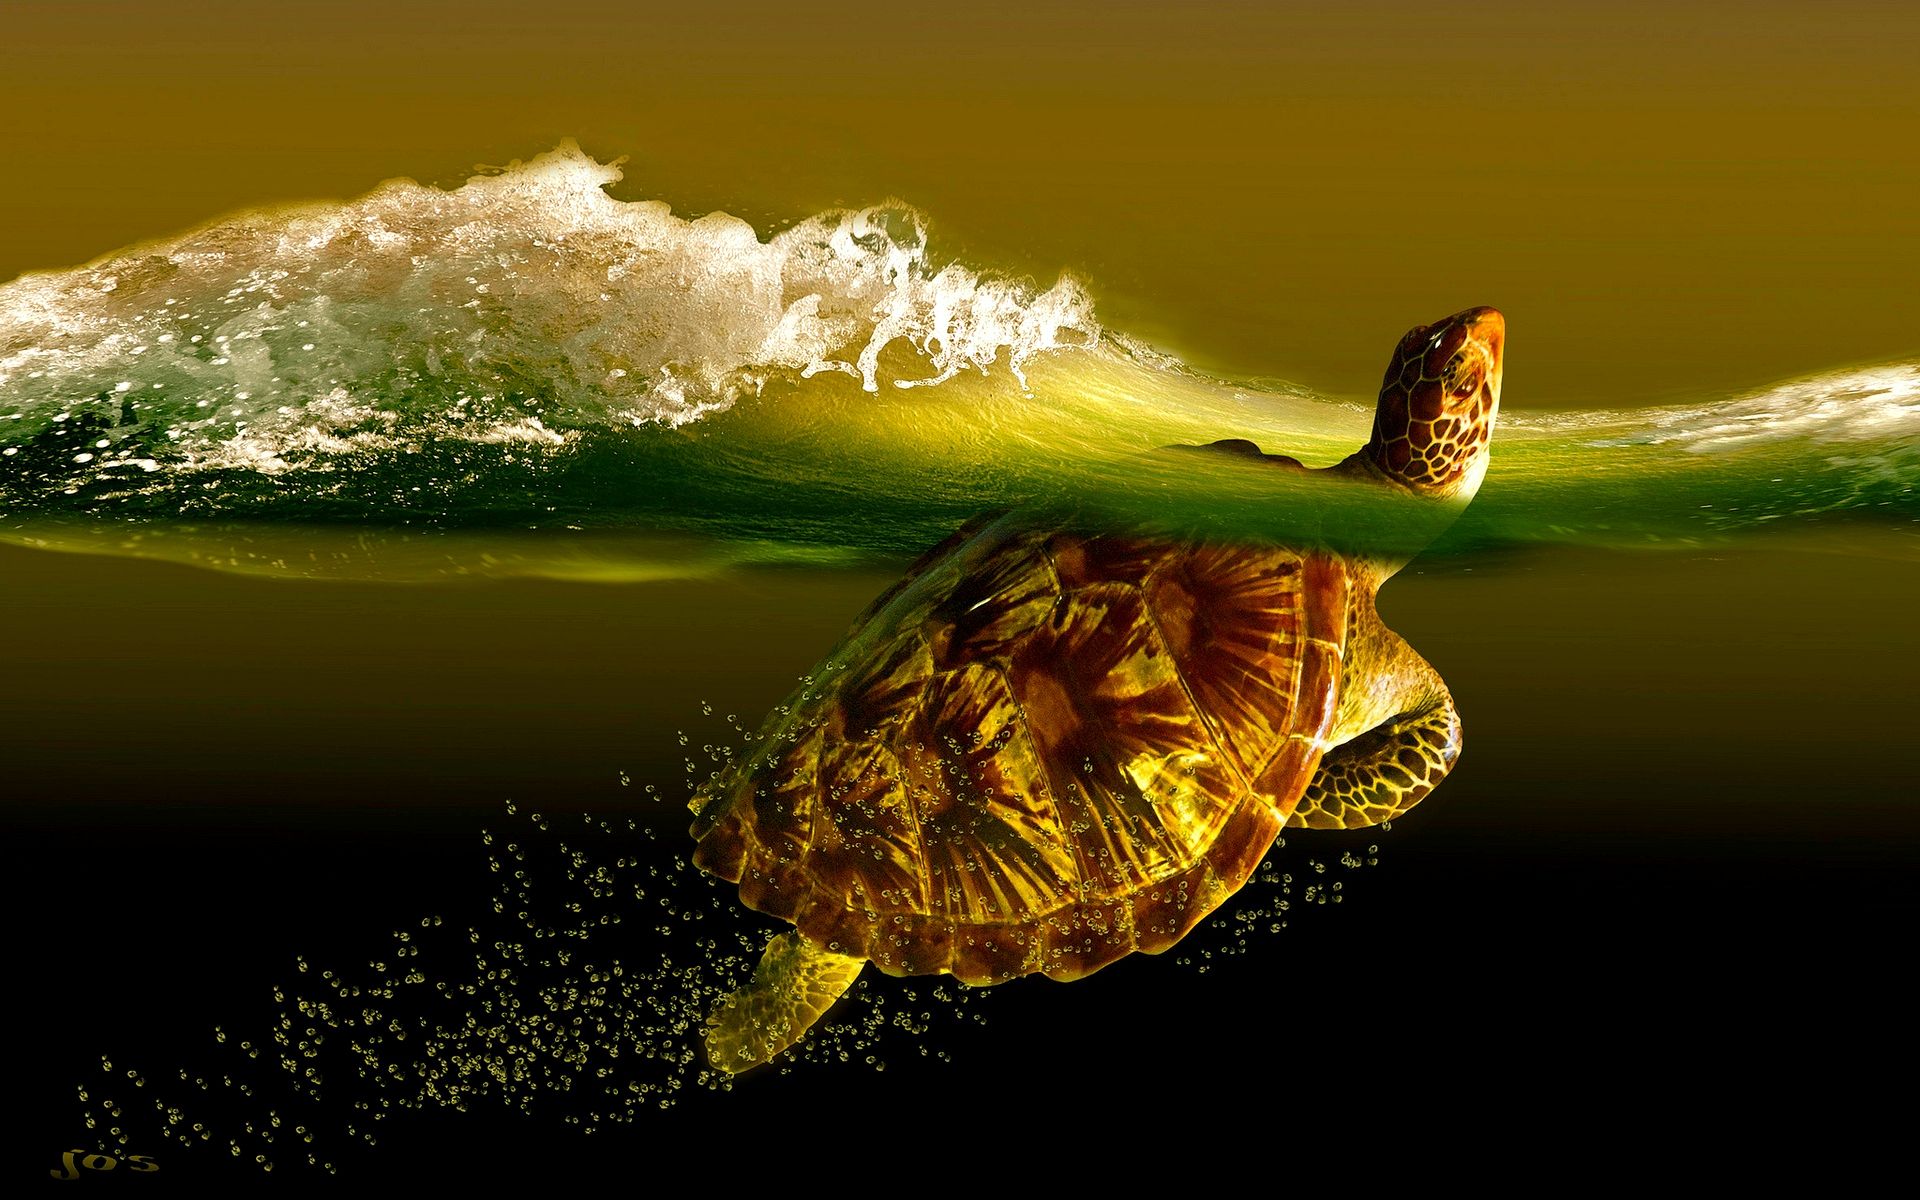 Turtle Background for Computer. Cute Turtle Wallpaper, Weird Turtle Wallpaper and Interesting Turtle Wallpaper